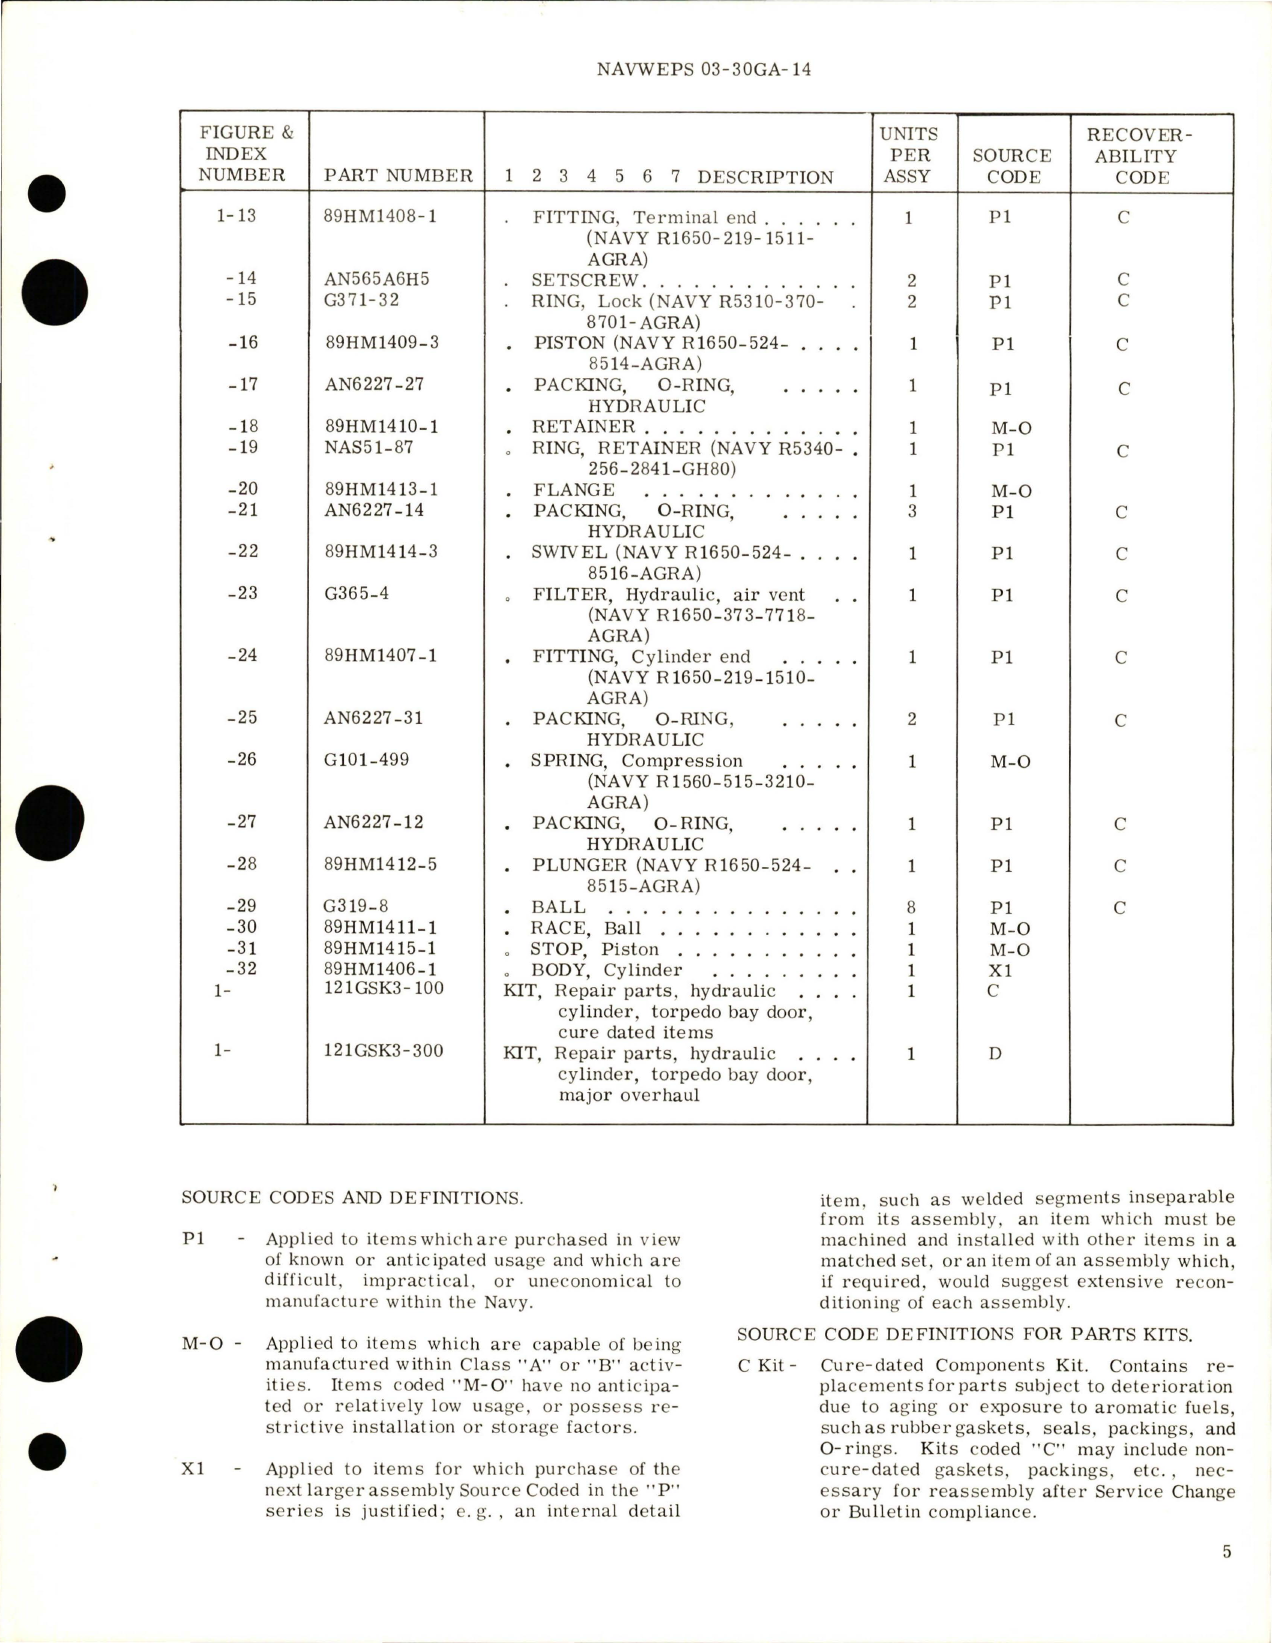 Sample page 5 from AirCorps Library document: Overhaul Instructions with Parts Breakdown for Torpedo Bay Door Cylinder Assembly - 89H1050-5